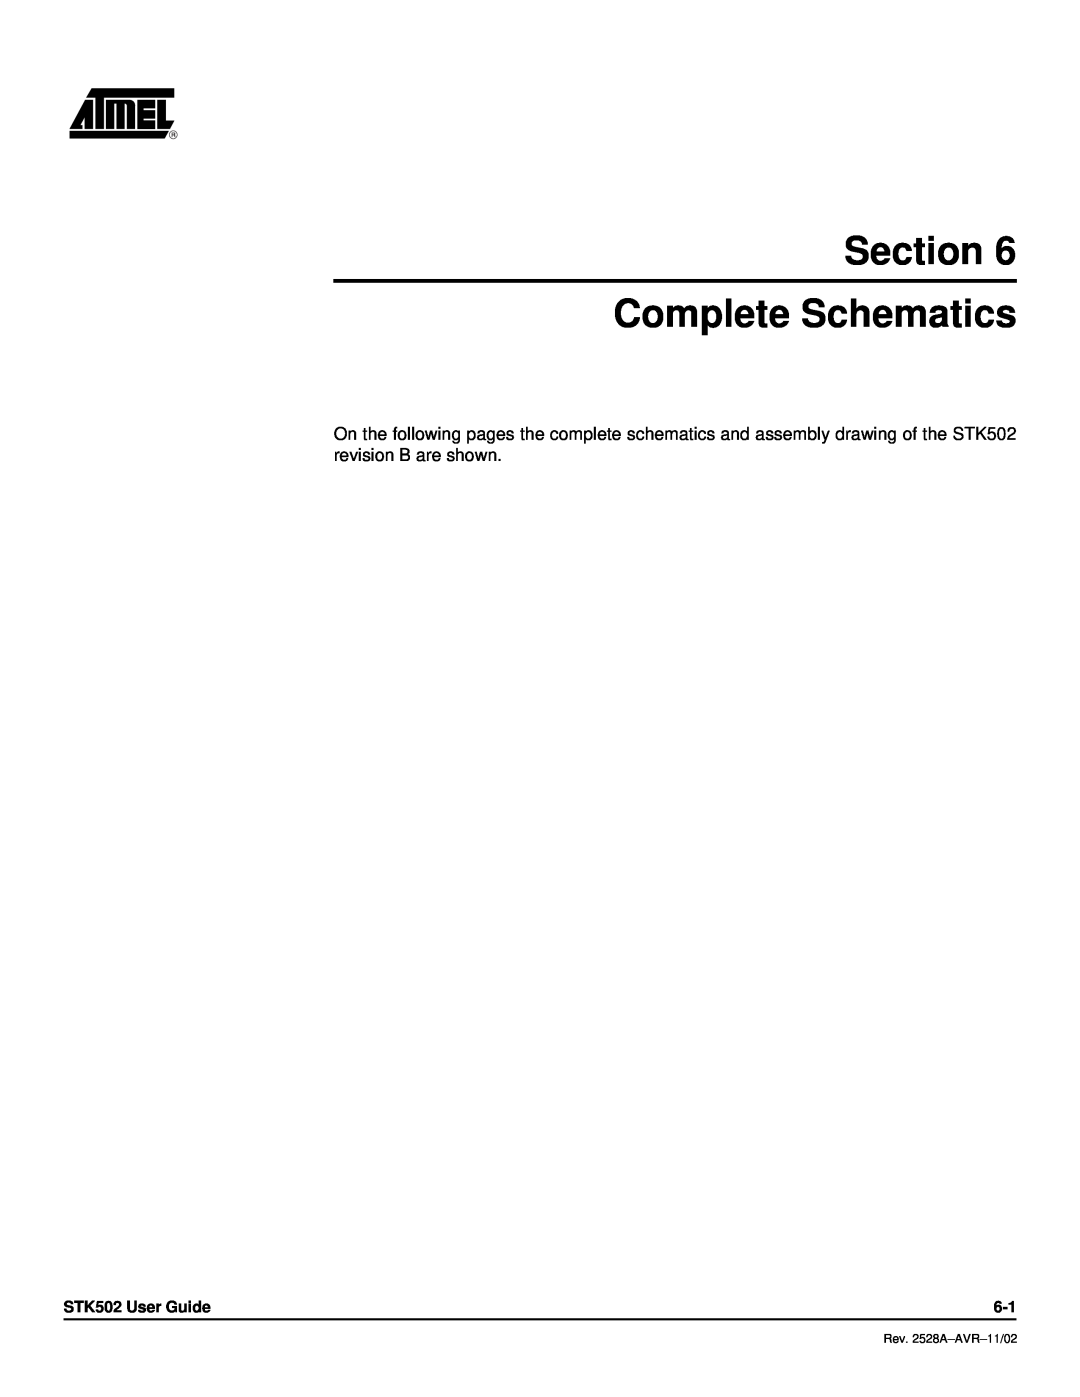 Atmel STK502 manual Section Complete Schematics, Rev. 2528A-AVR-11/02 